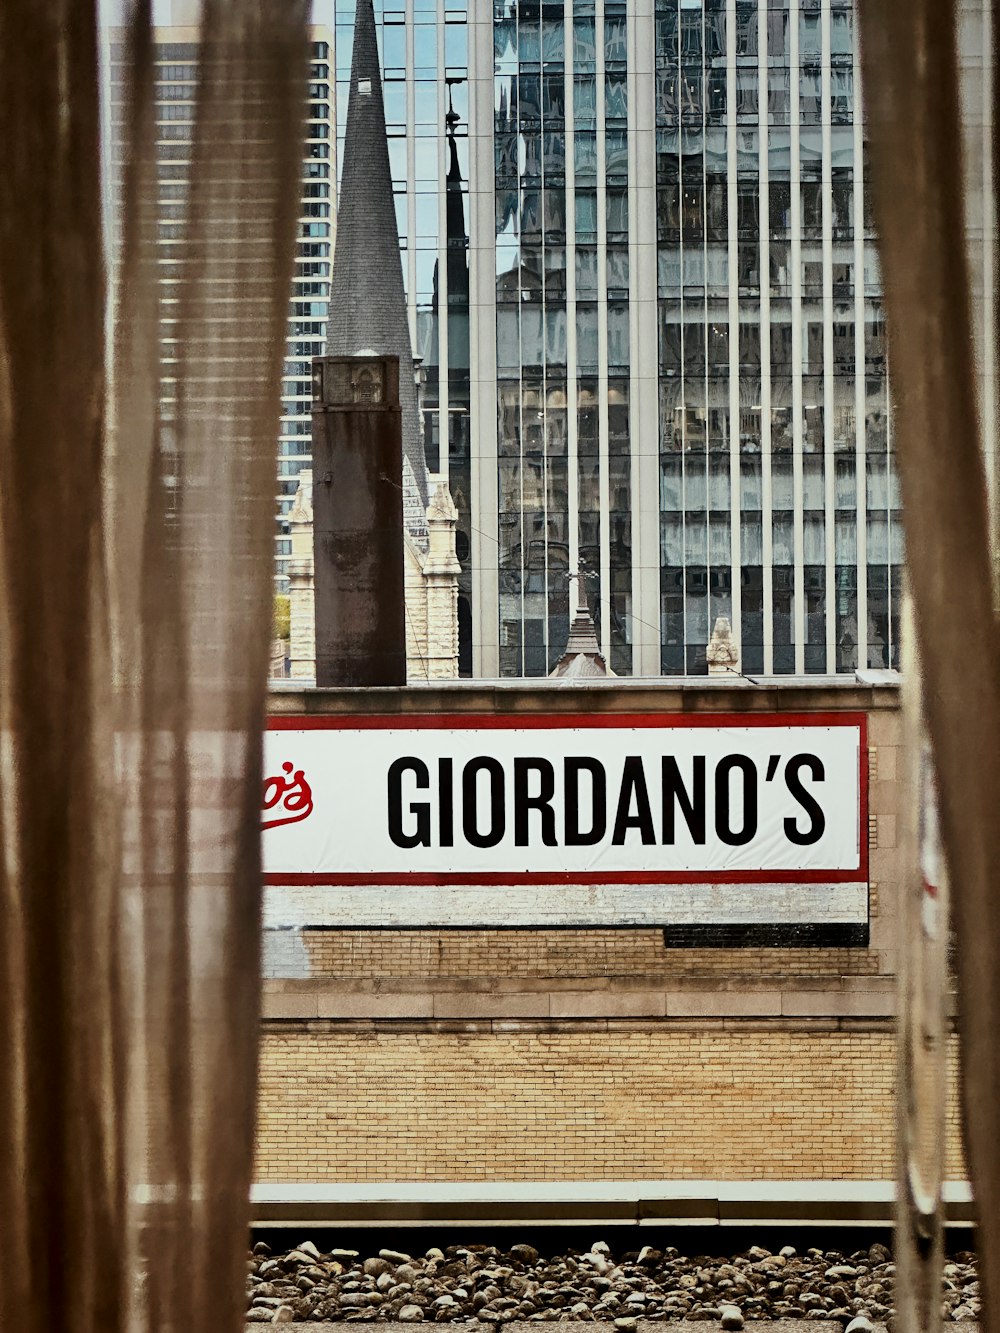 there is a sign that says giordano's on the side of a